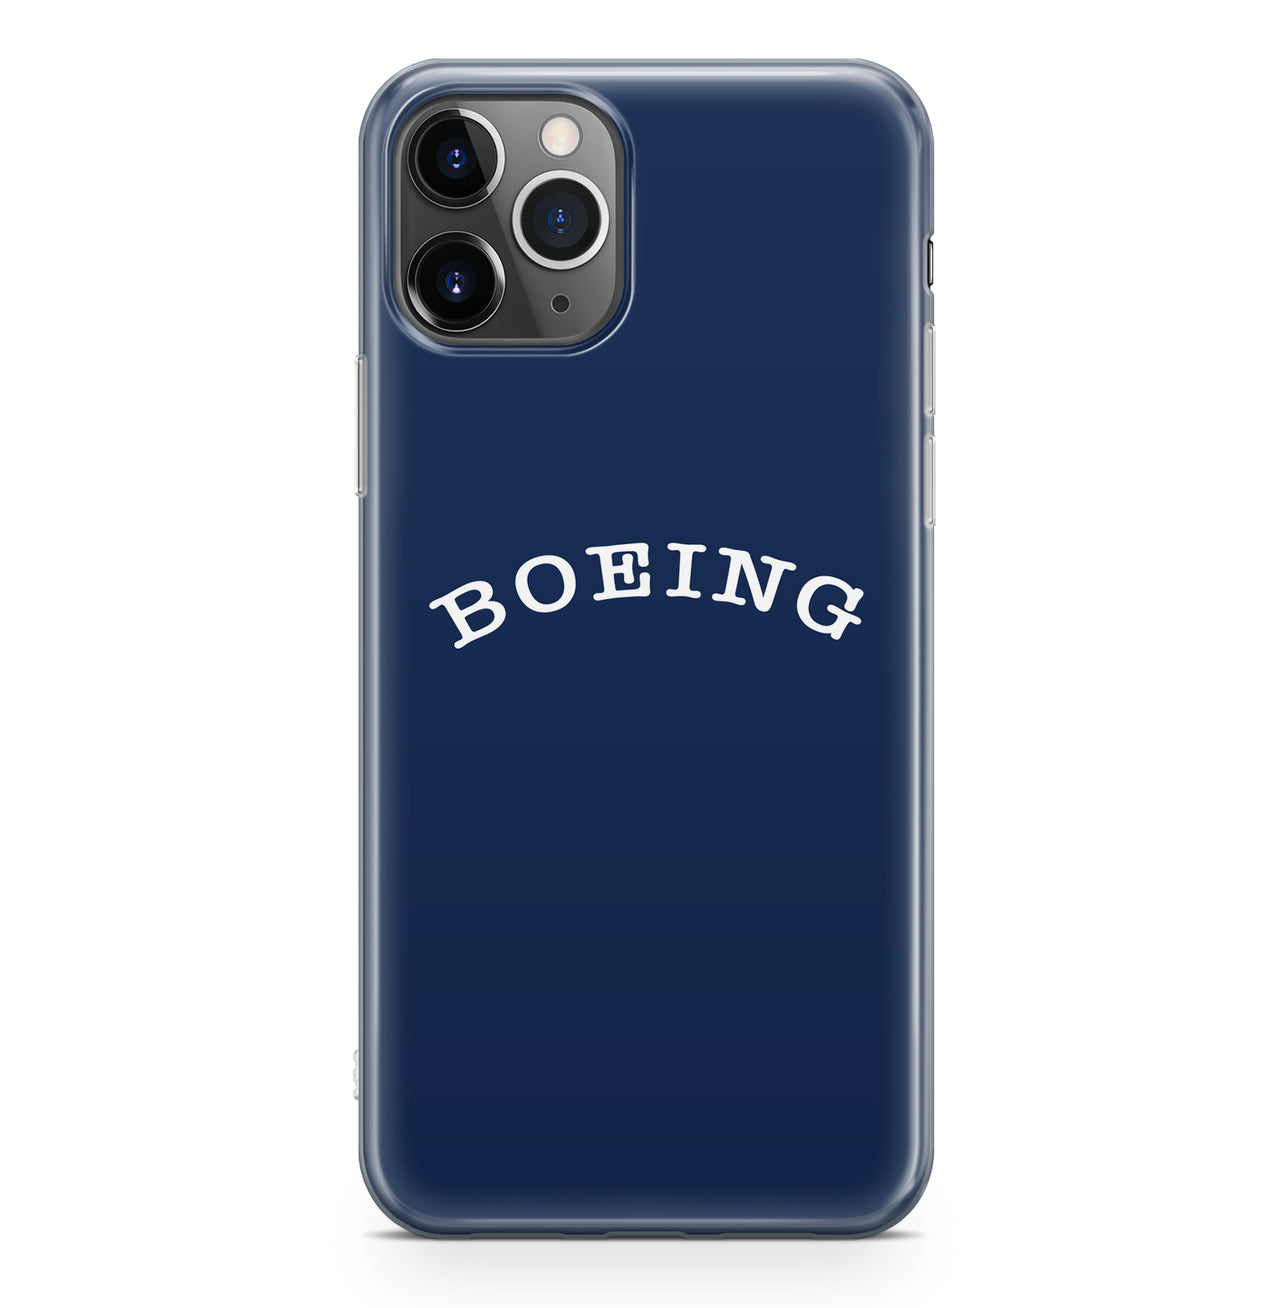 Special BOEING Text Designed iPhone Cases